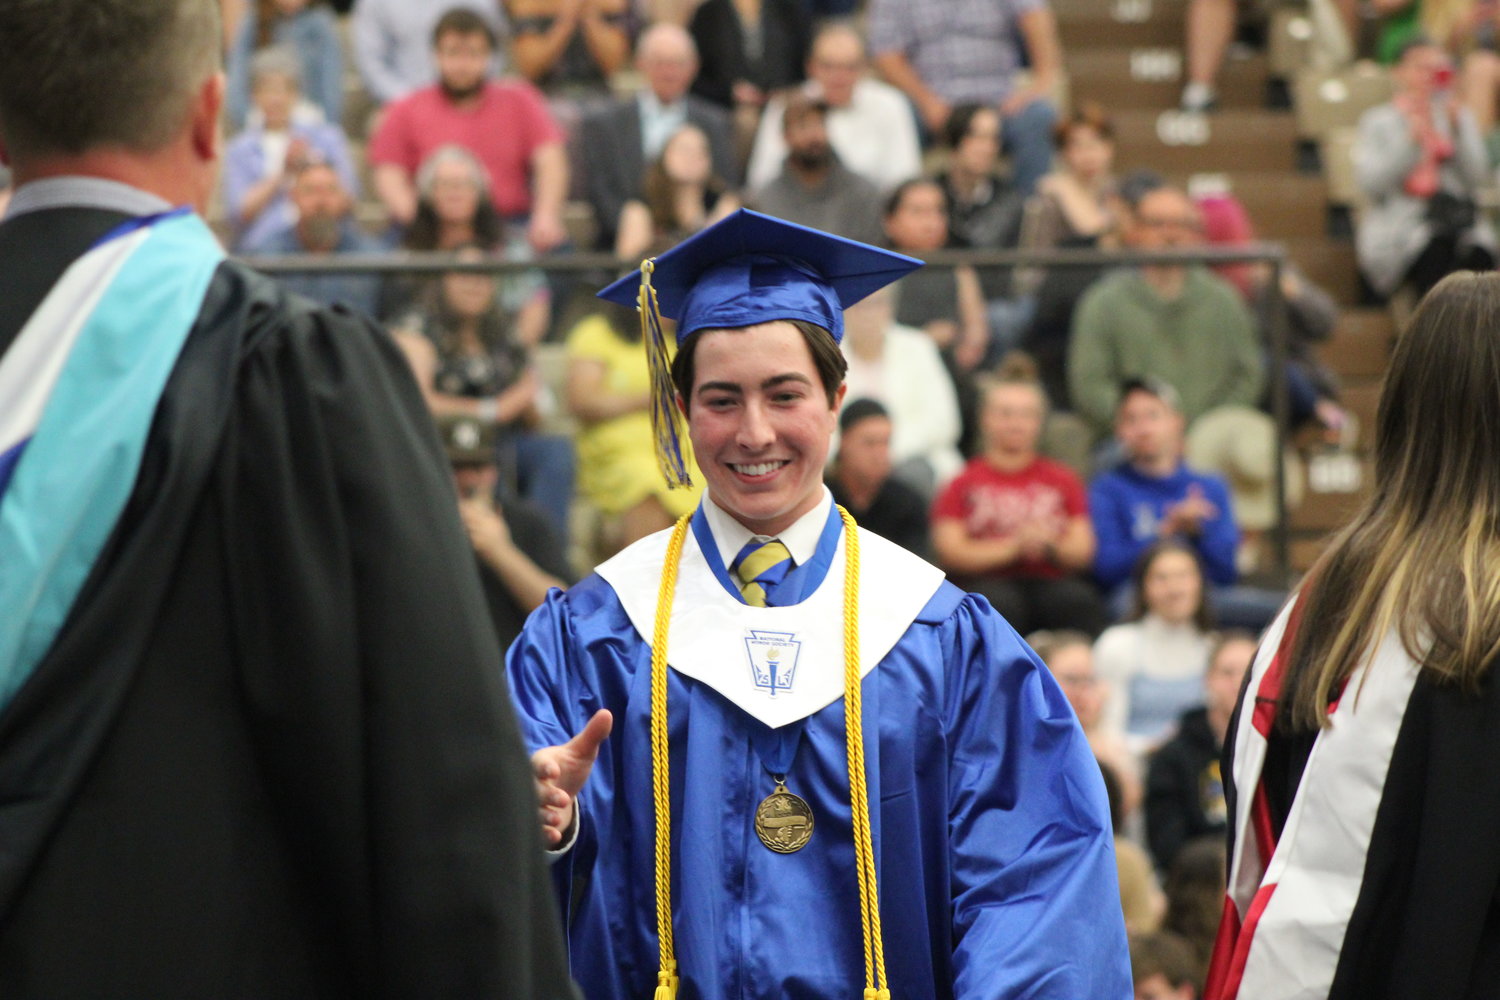 Valedictorian Marshall Horton walks across the stage to receive his diploma.